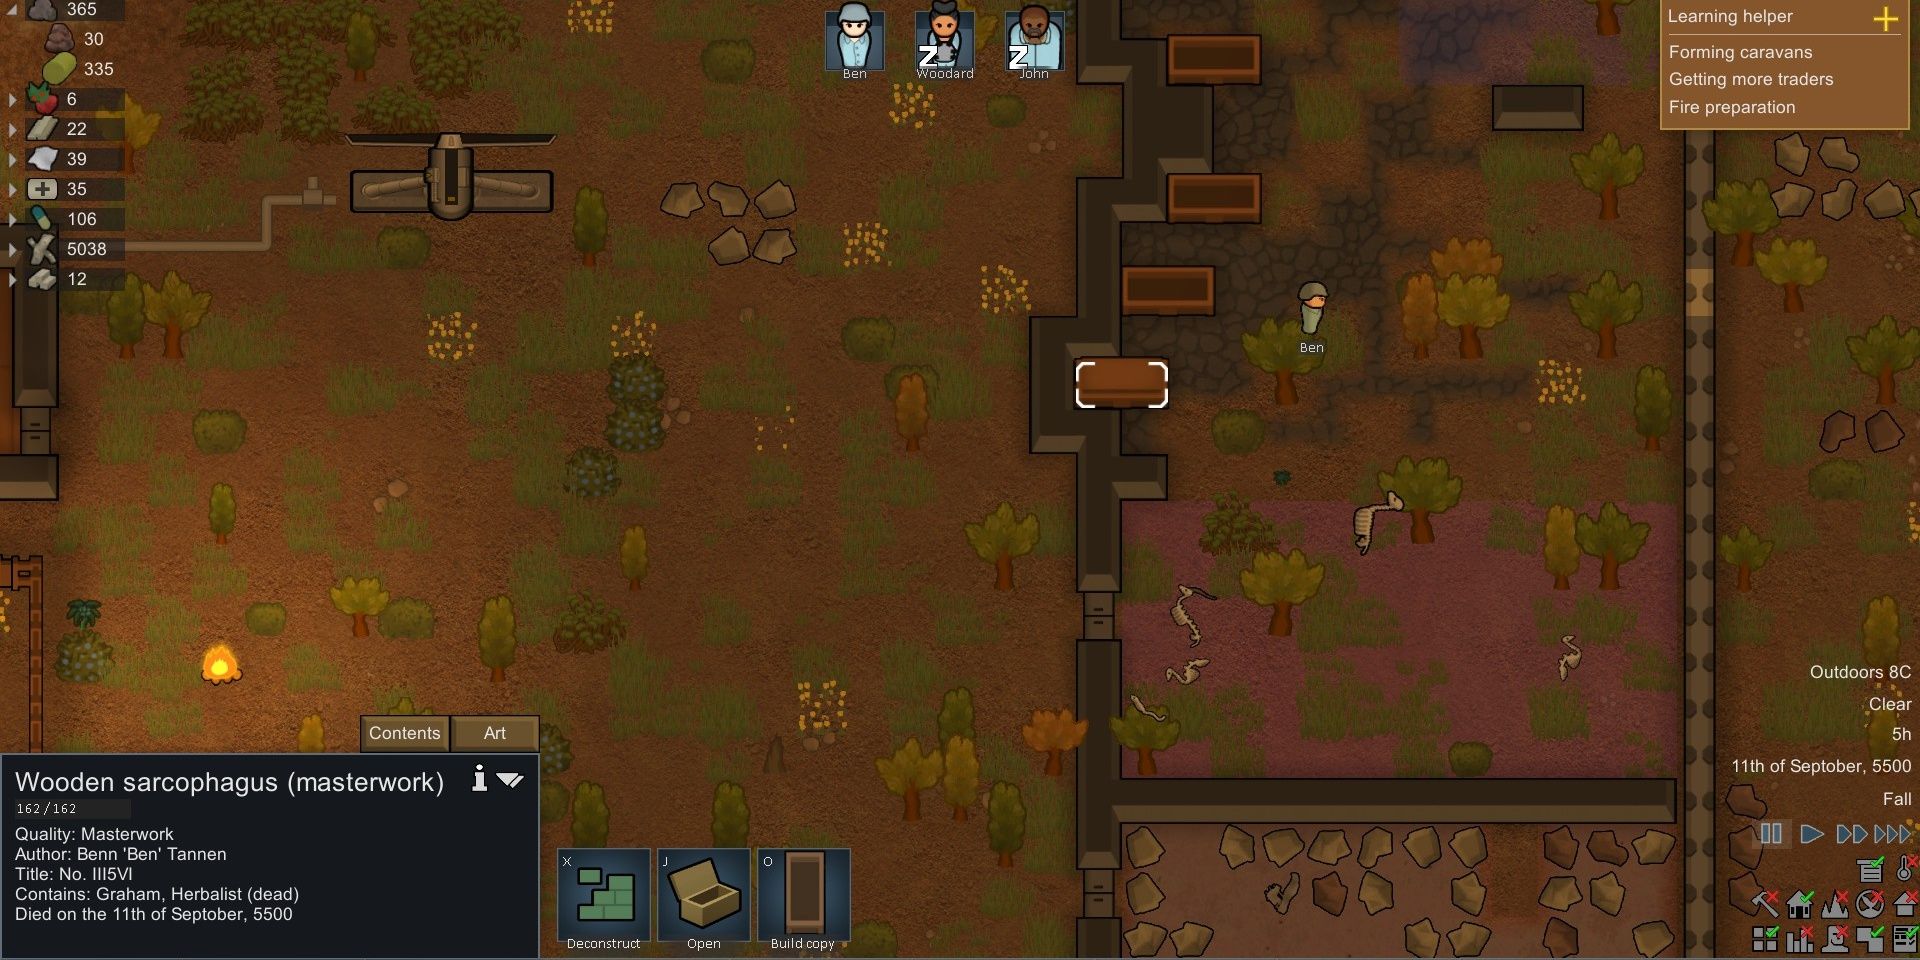 A colonist grieving for the deceased